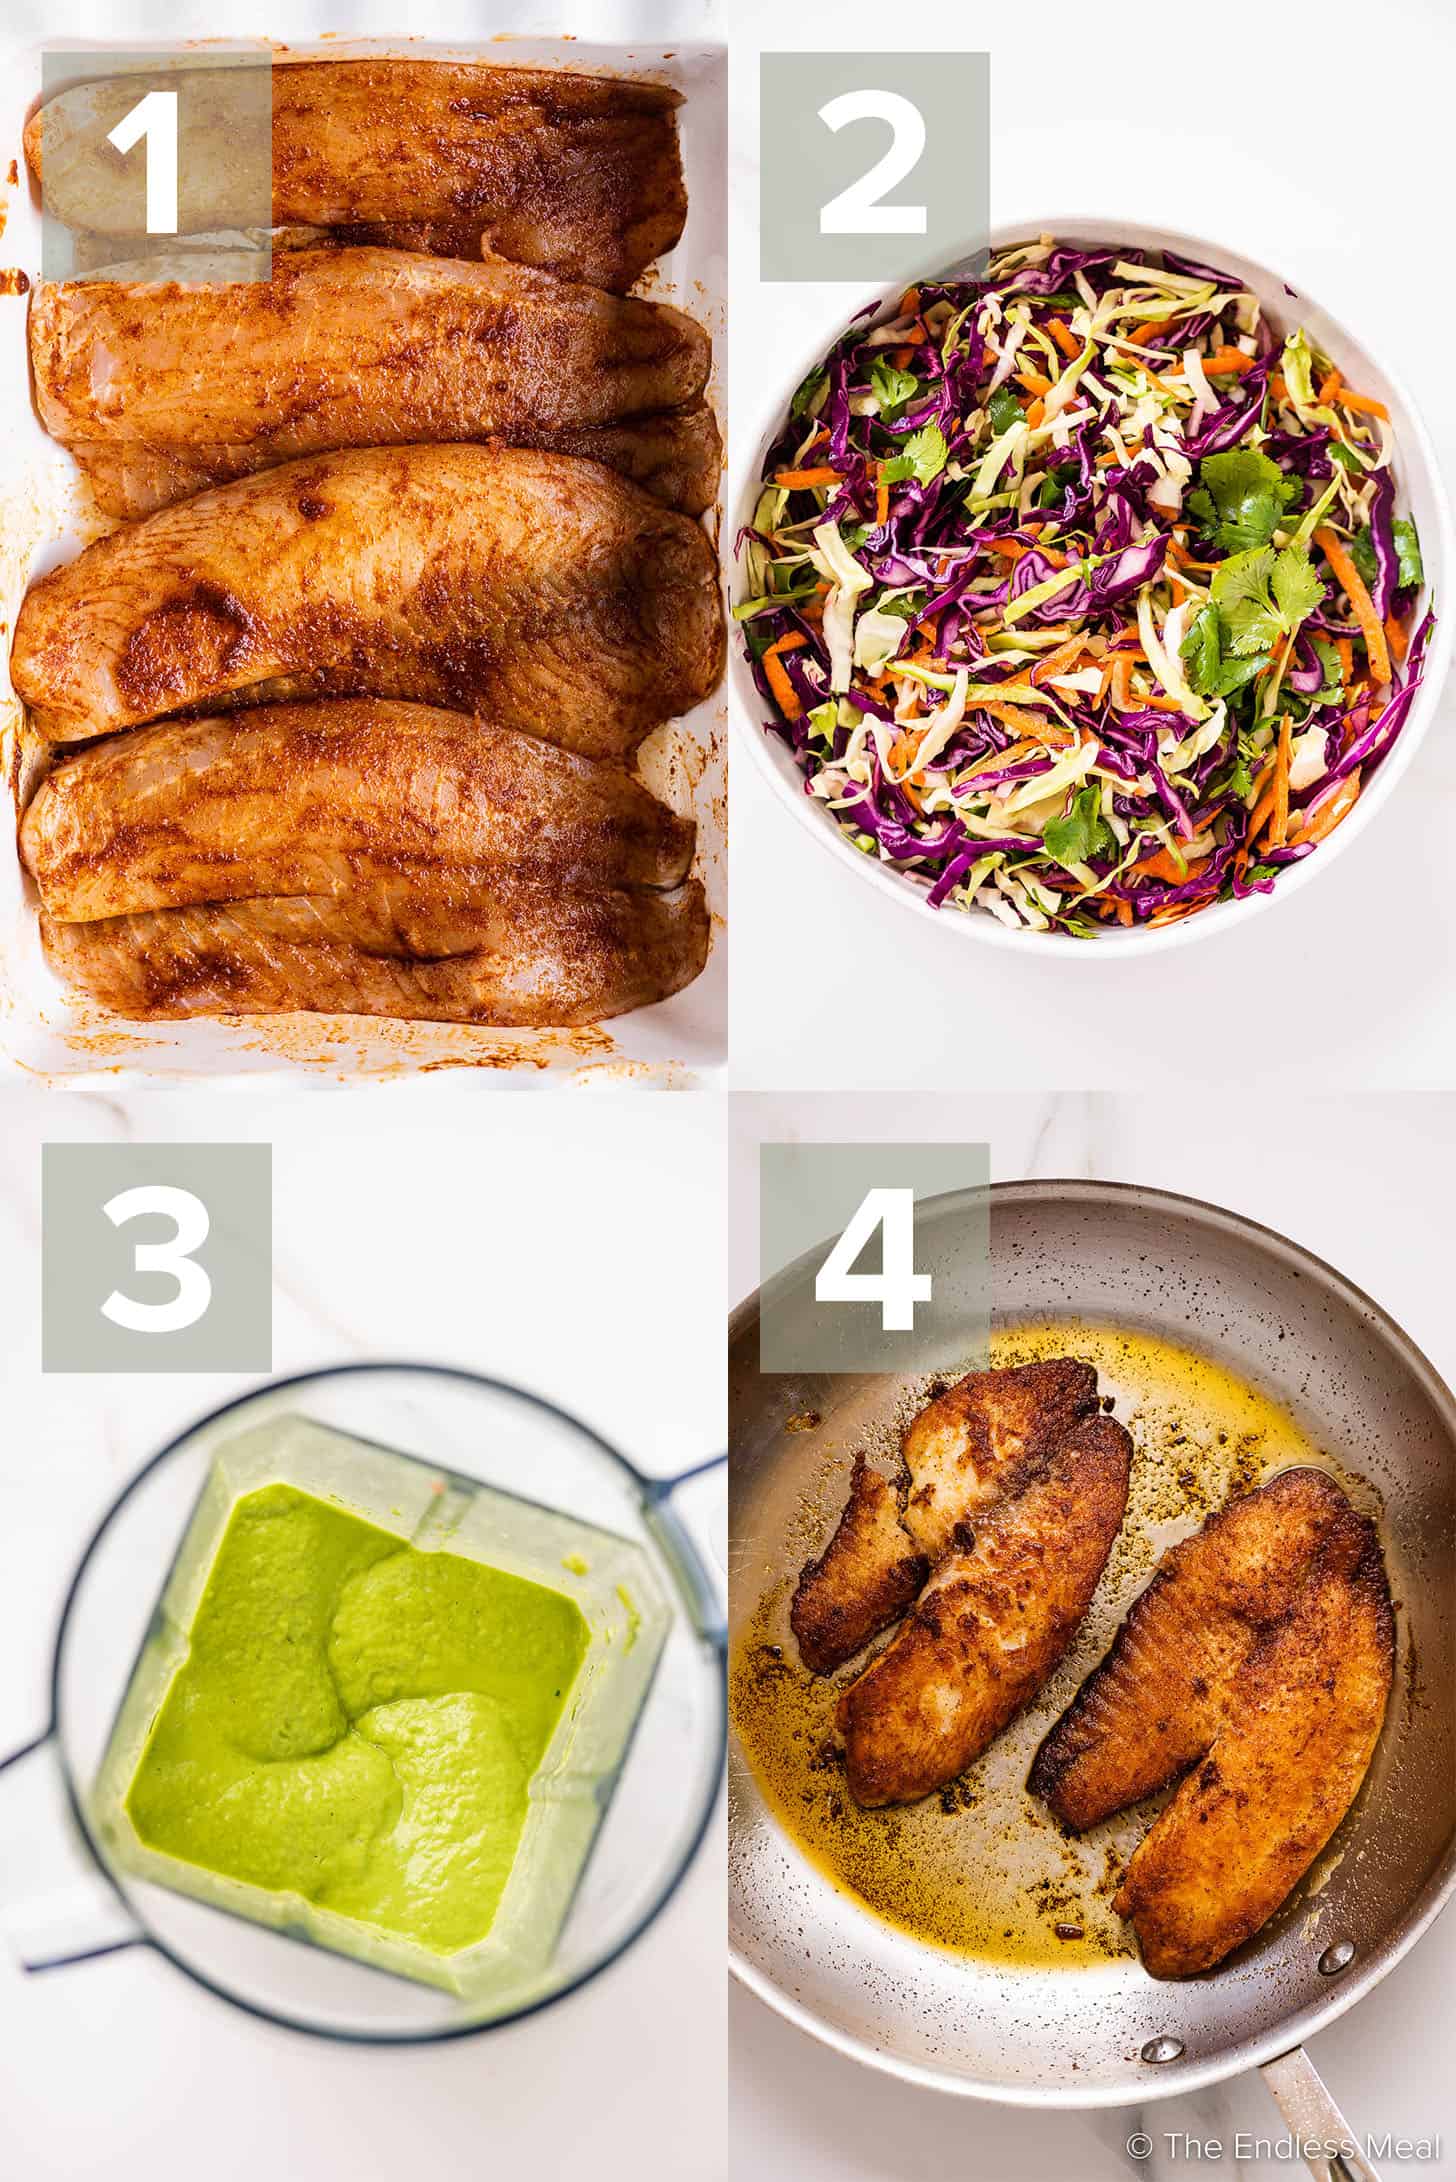 4 pictures showing how to make Baja Fish Tacos